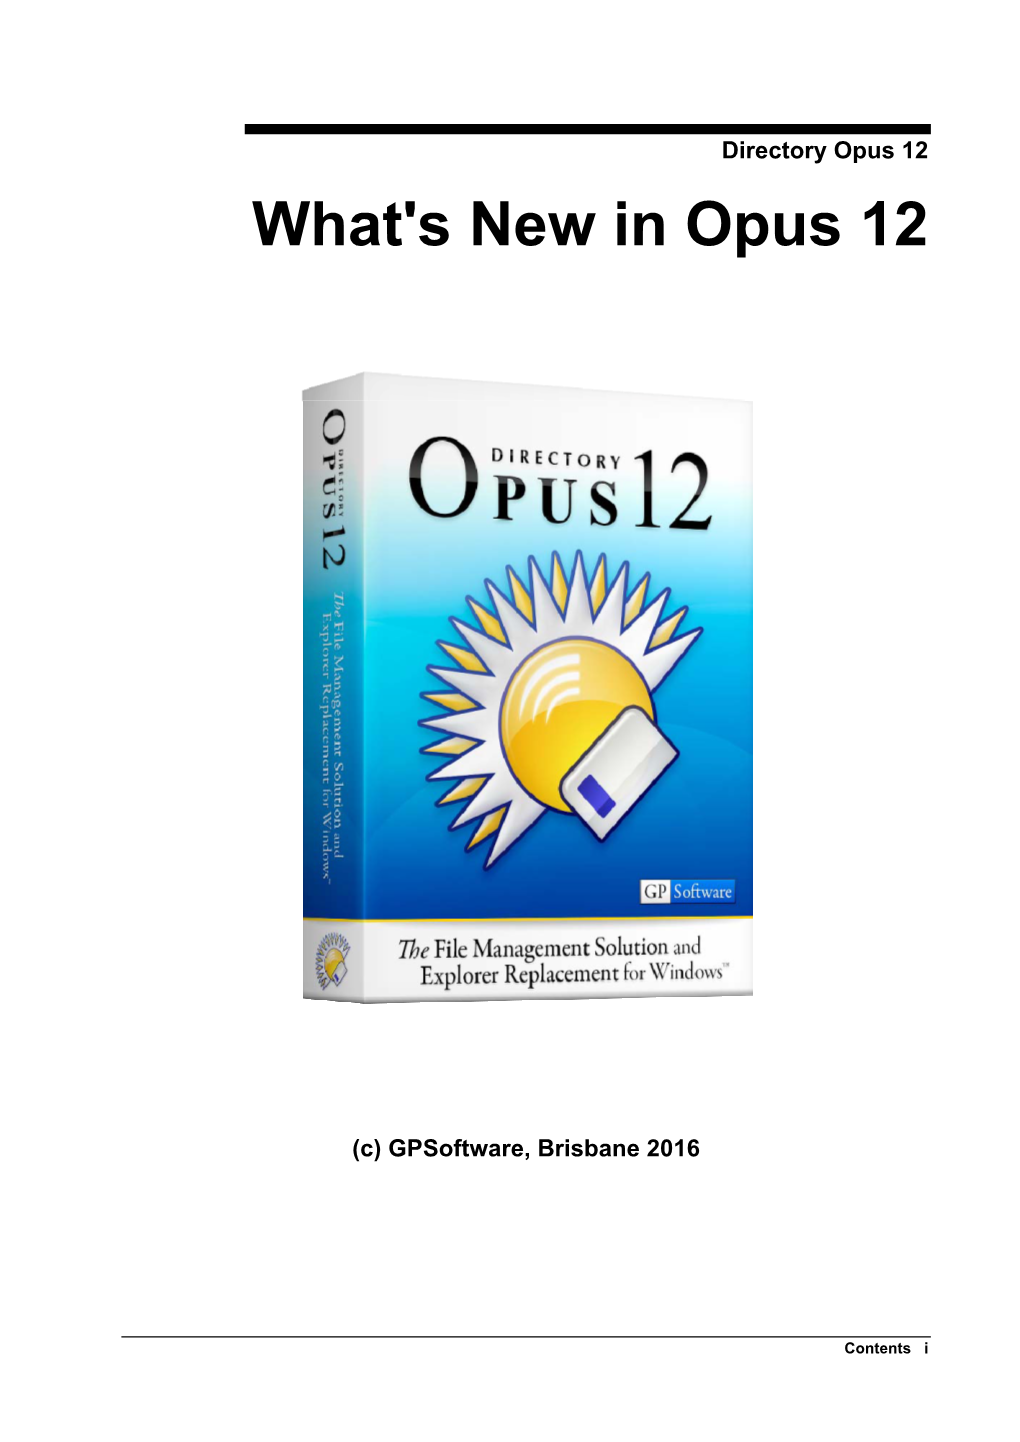 What's New in Opus 12